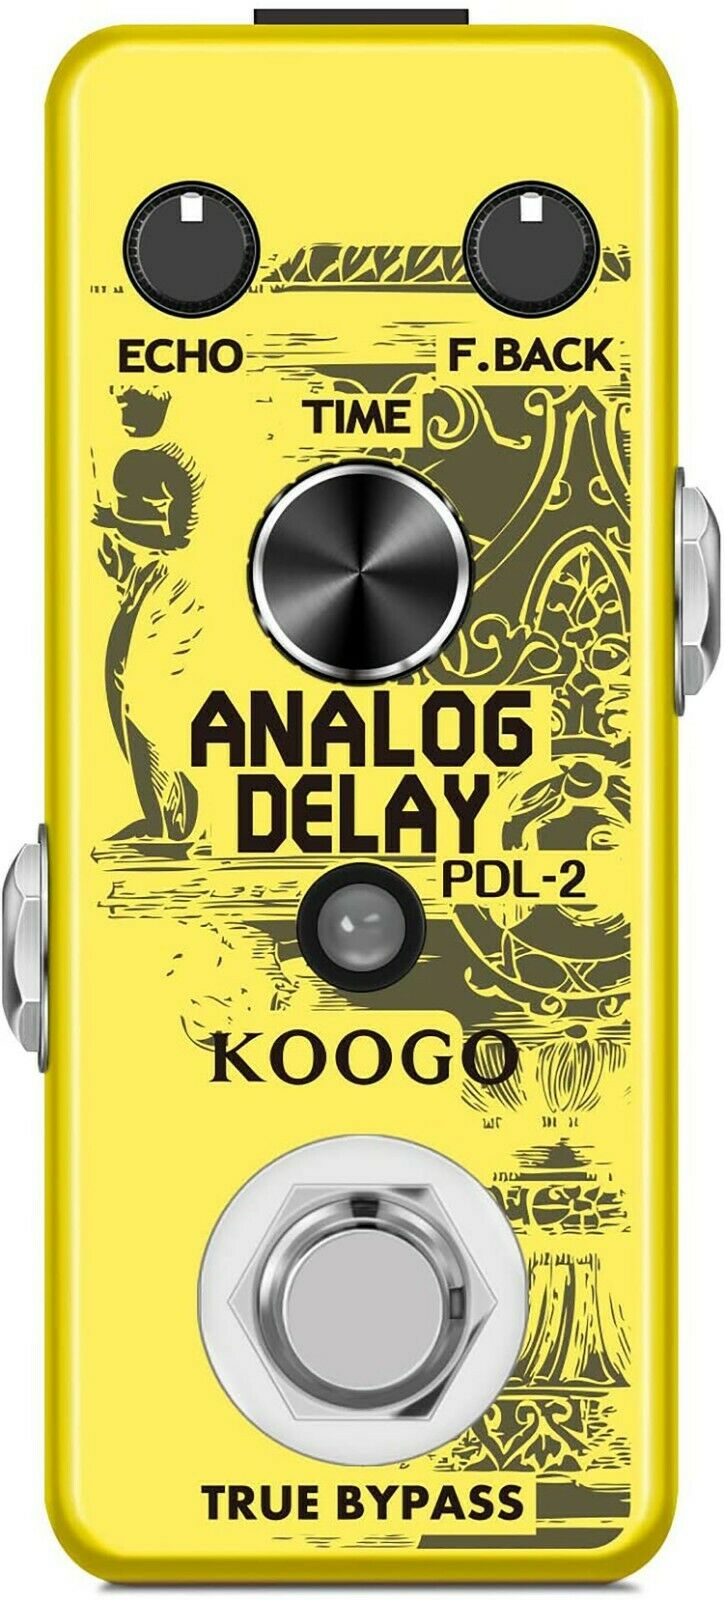 Koogo Pure Analog Circuit Delay Guitar Effect Pedal True Bypass Full Metal Shell